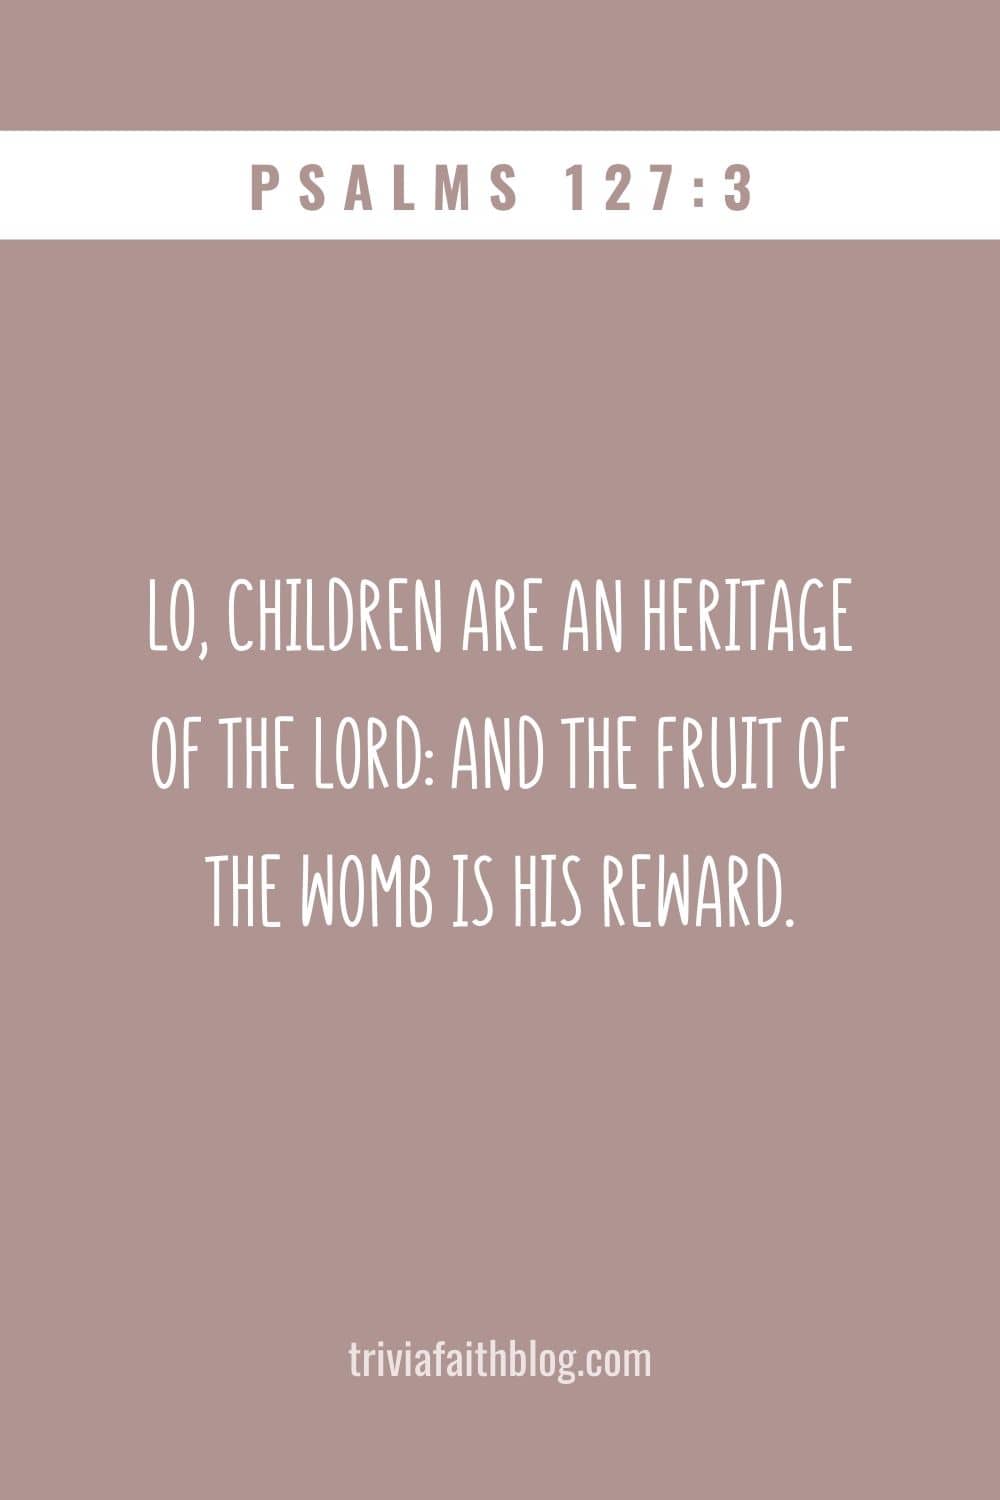 Lo, children are an heritage of the LORD and the fruit of the womb is his reward